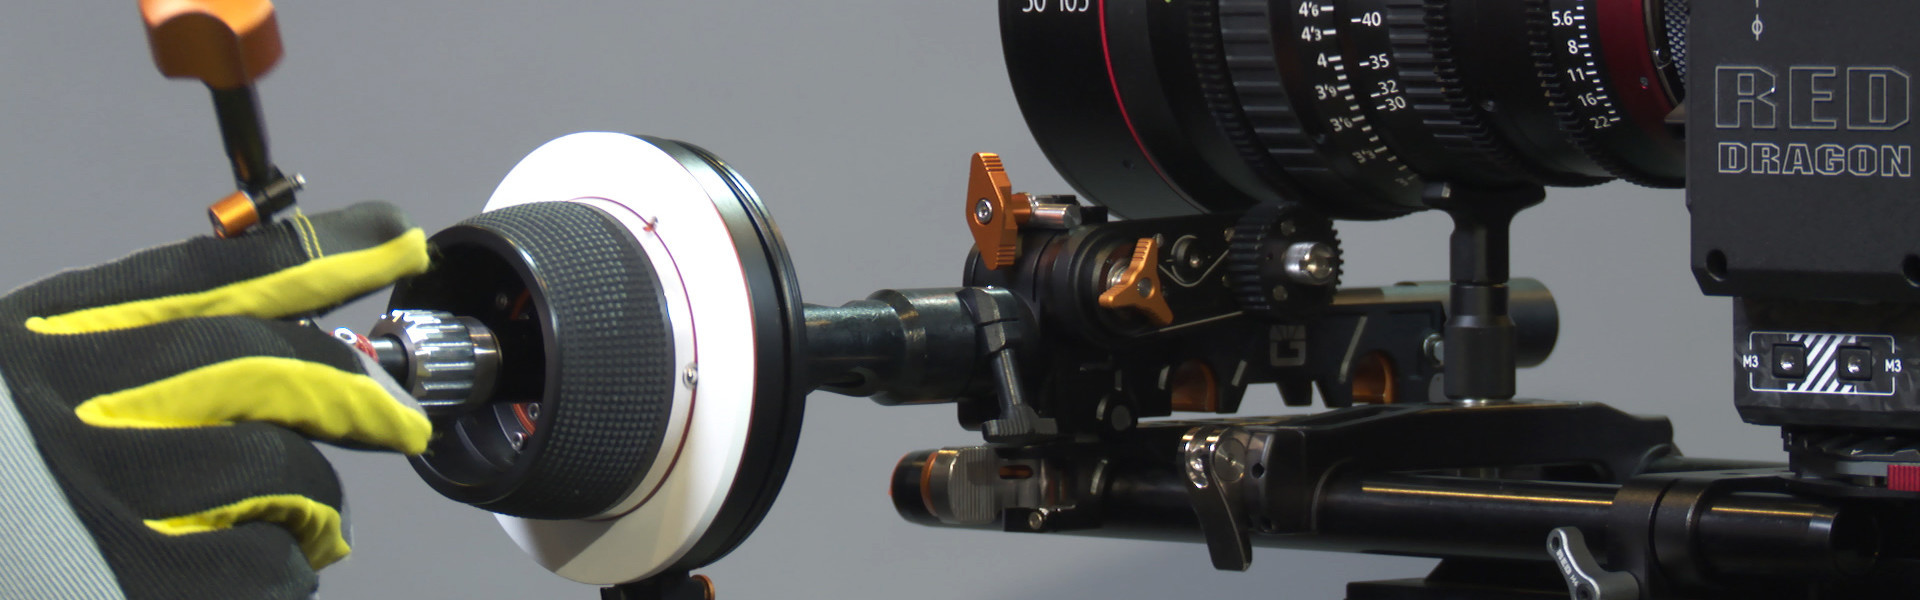 Header image for article At the Bench: Bright Tangerine Revolvr Follow Focus